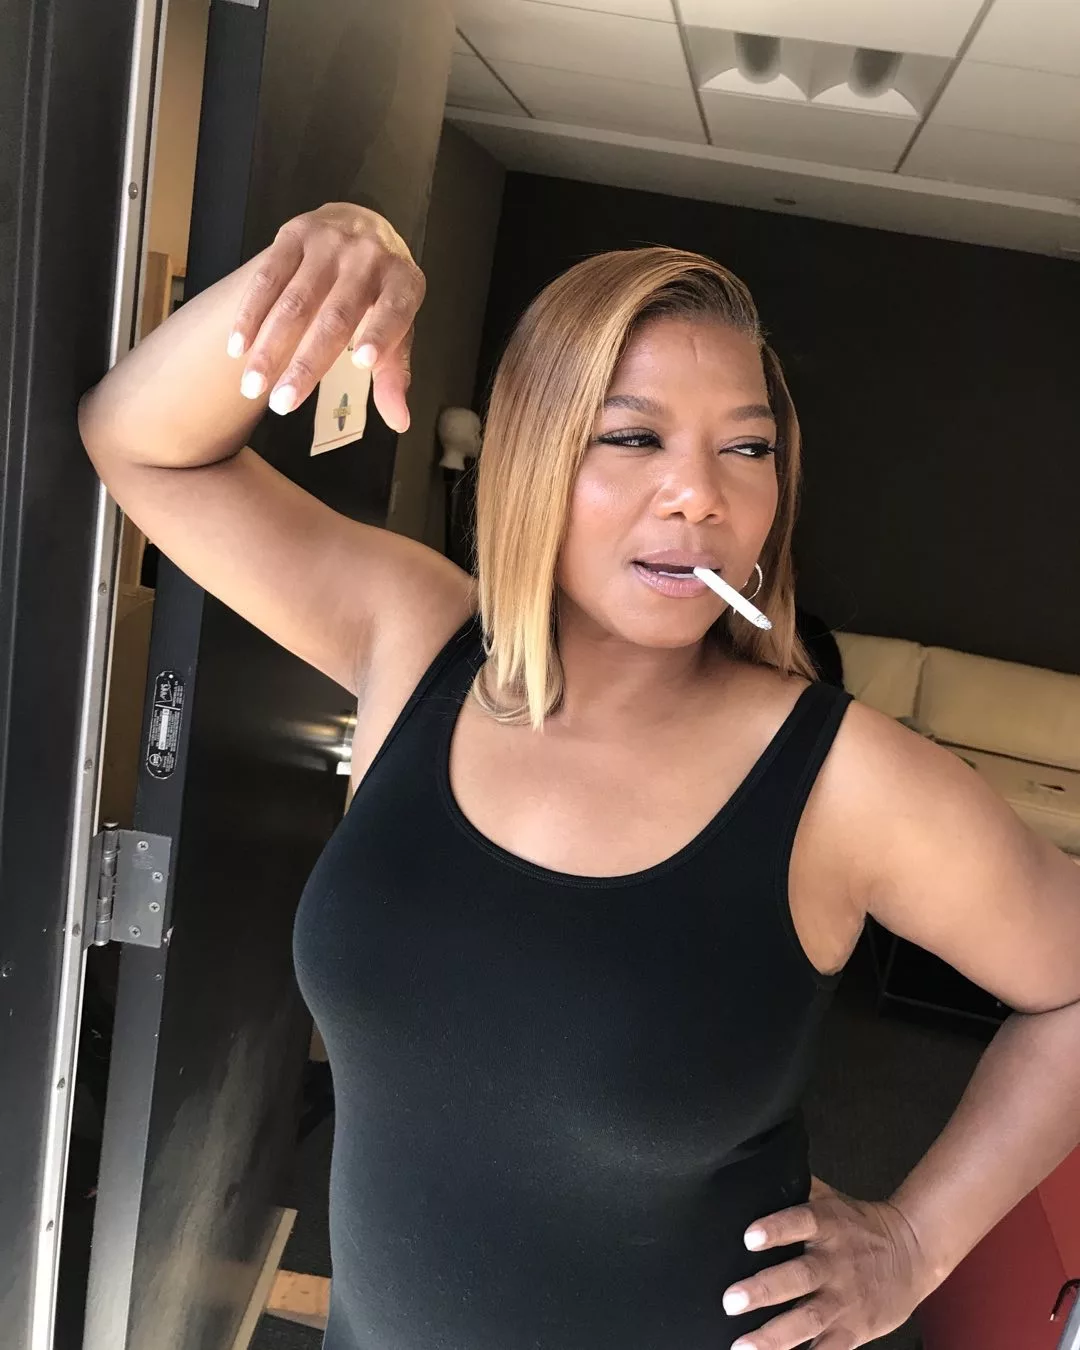 Queen Latifah wearing black sando and holding a cigarette and lighter.